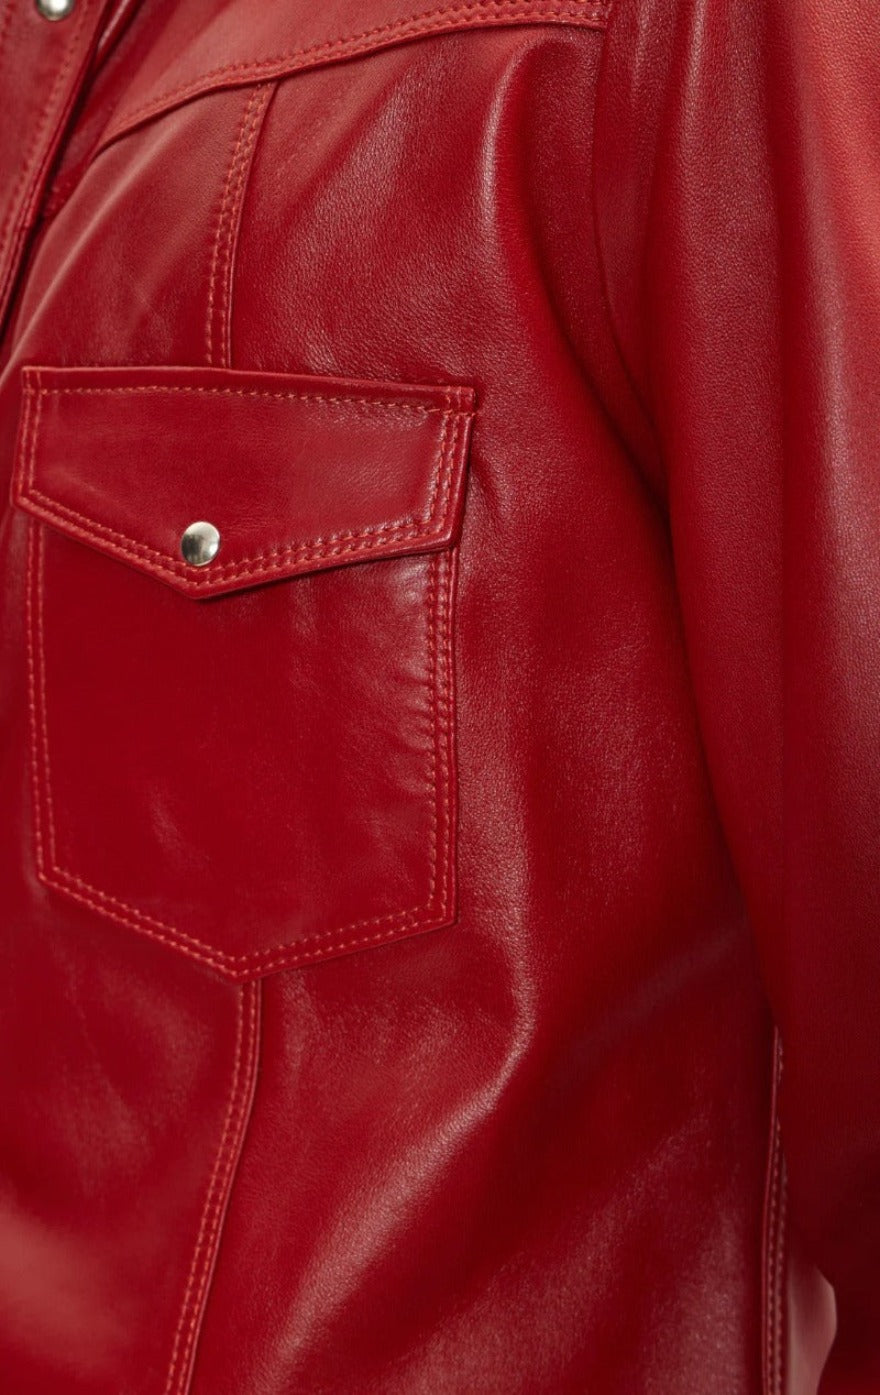 Close up view of the pocket of our Mens Red Leather Shirt.